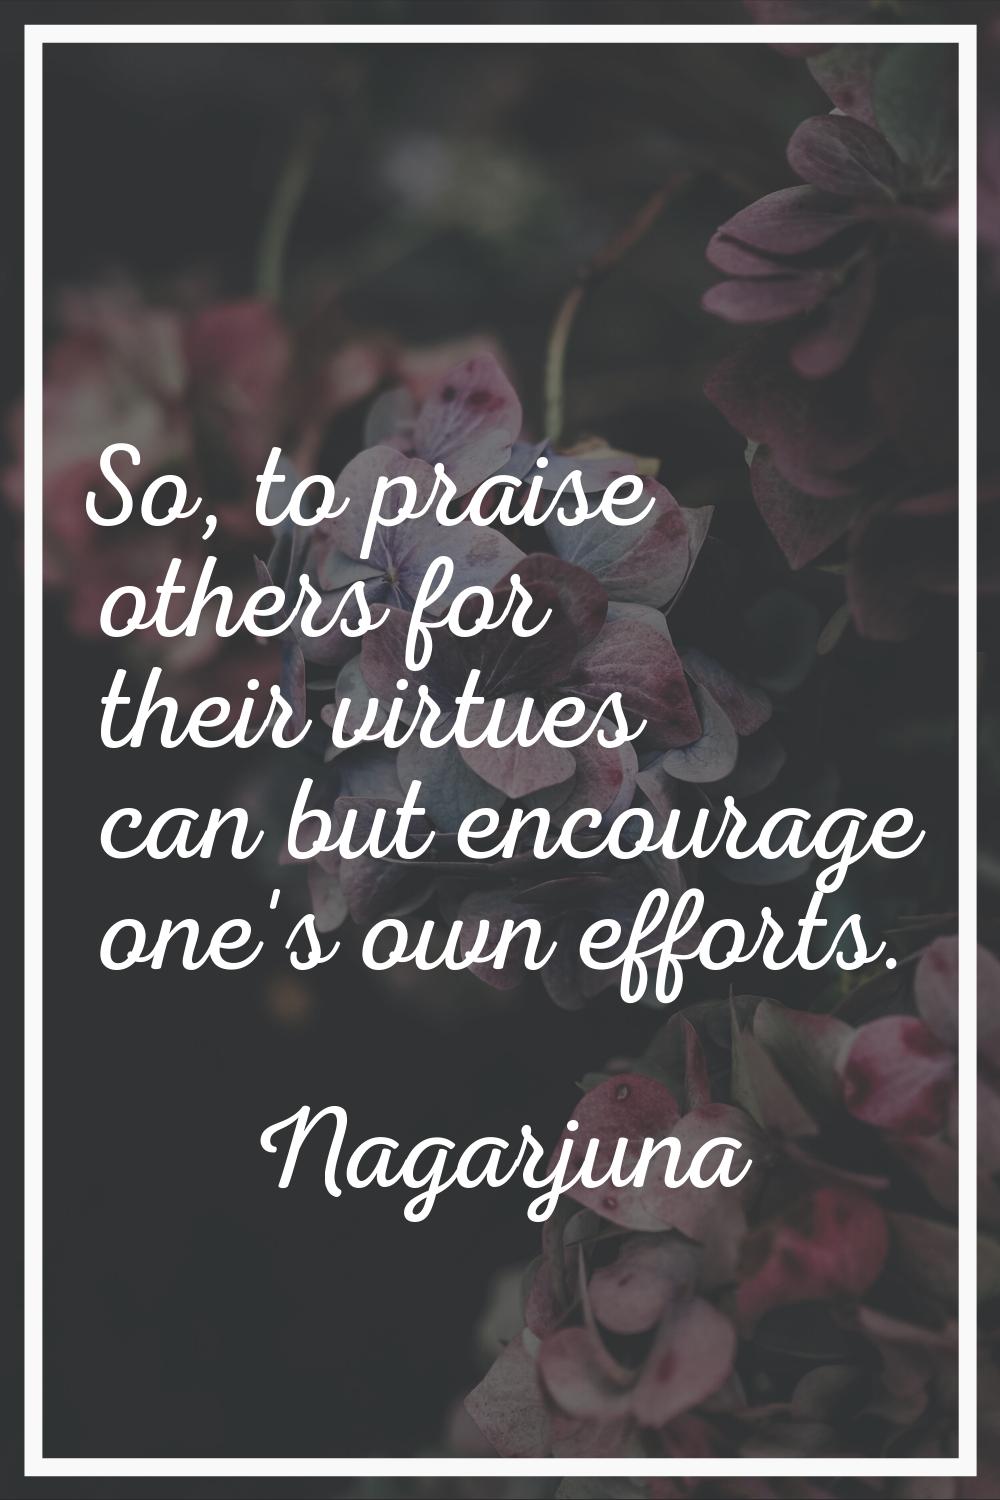 So, to praise others for their virtues can but encourage one's own efforts.